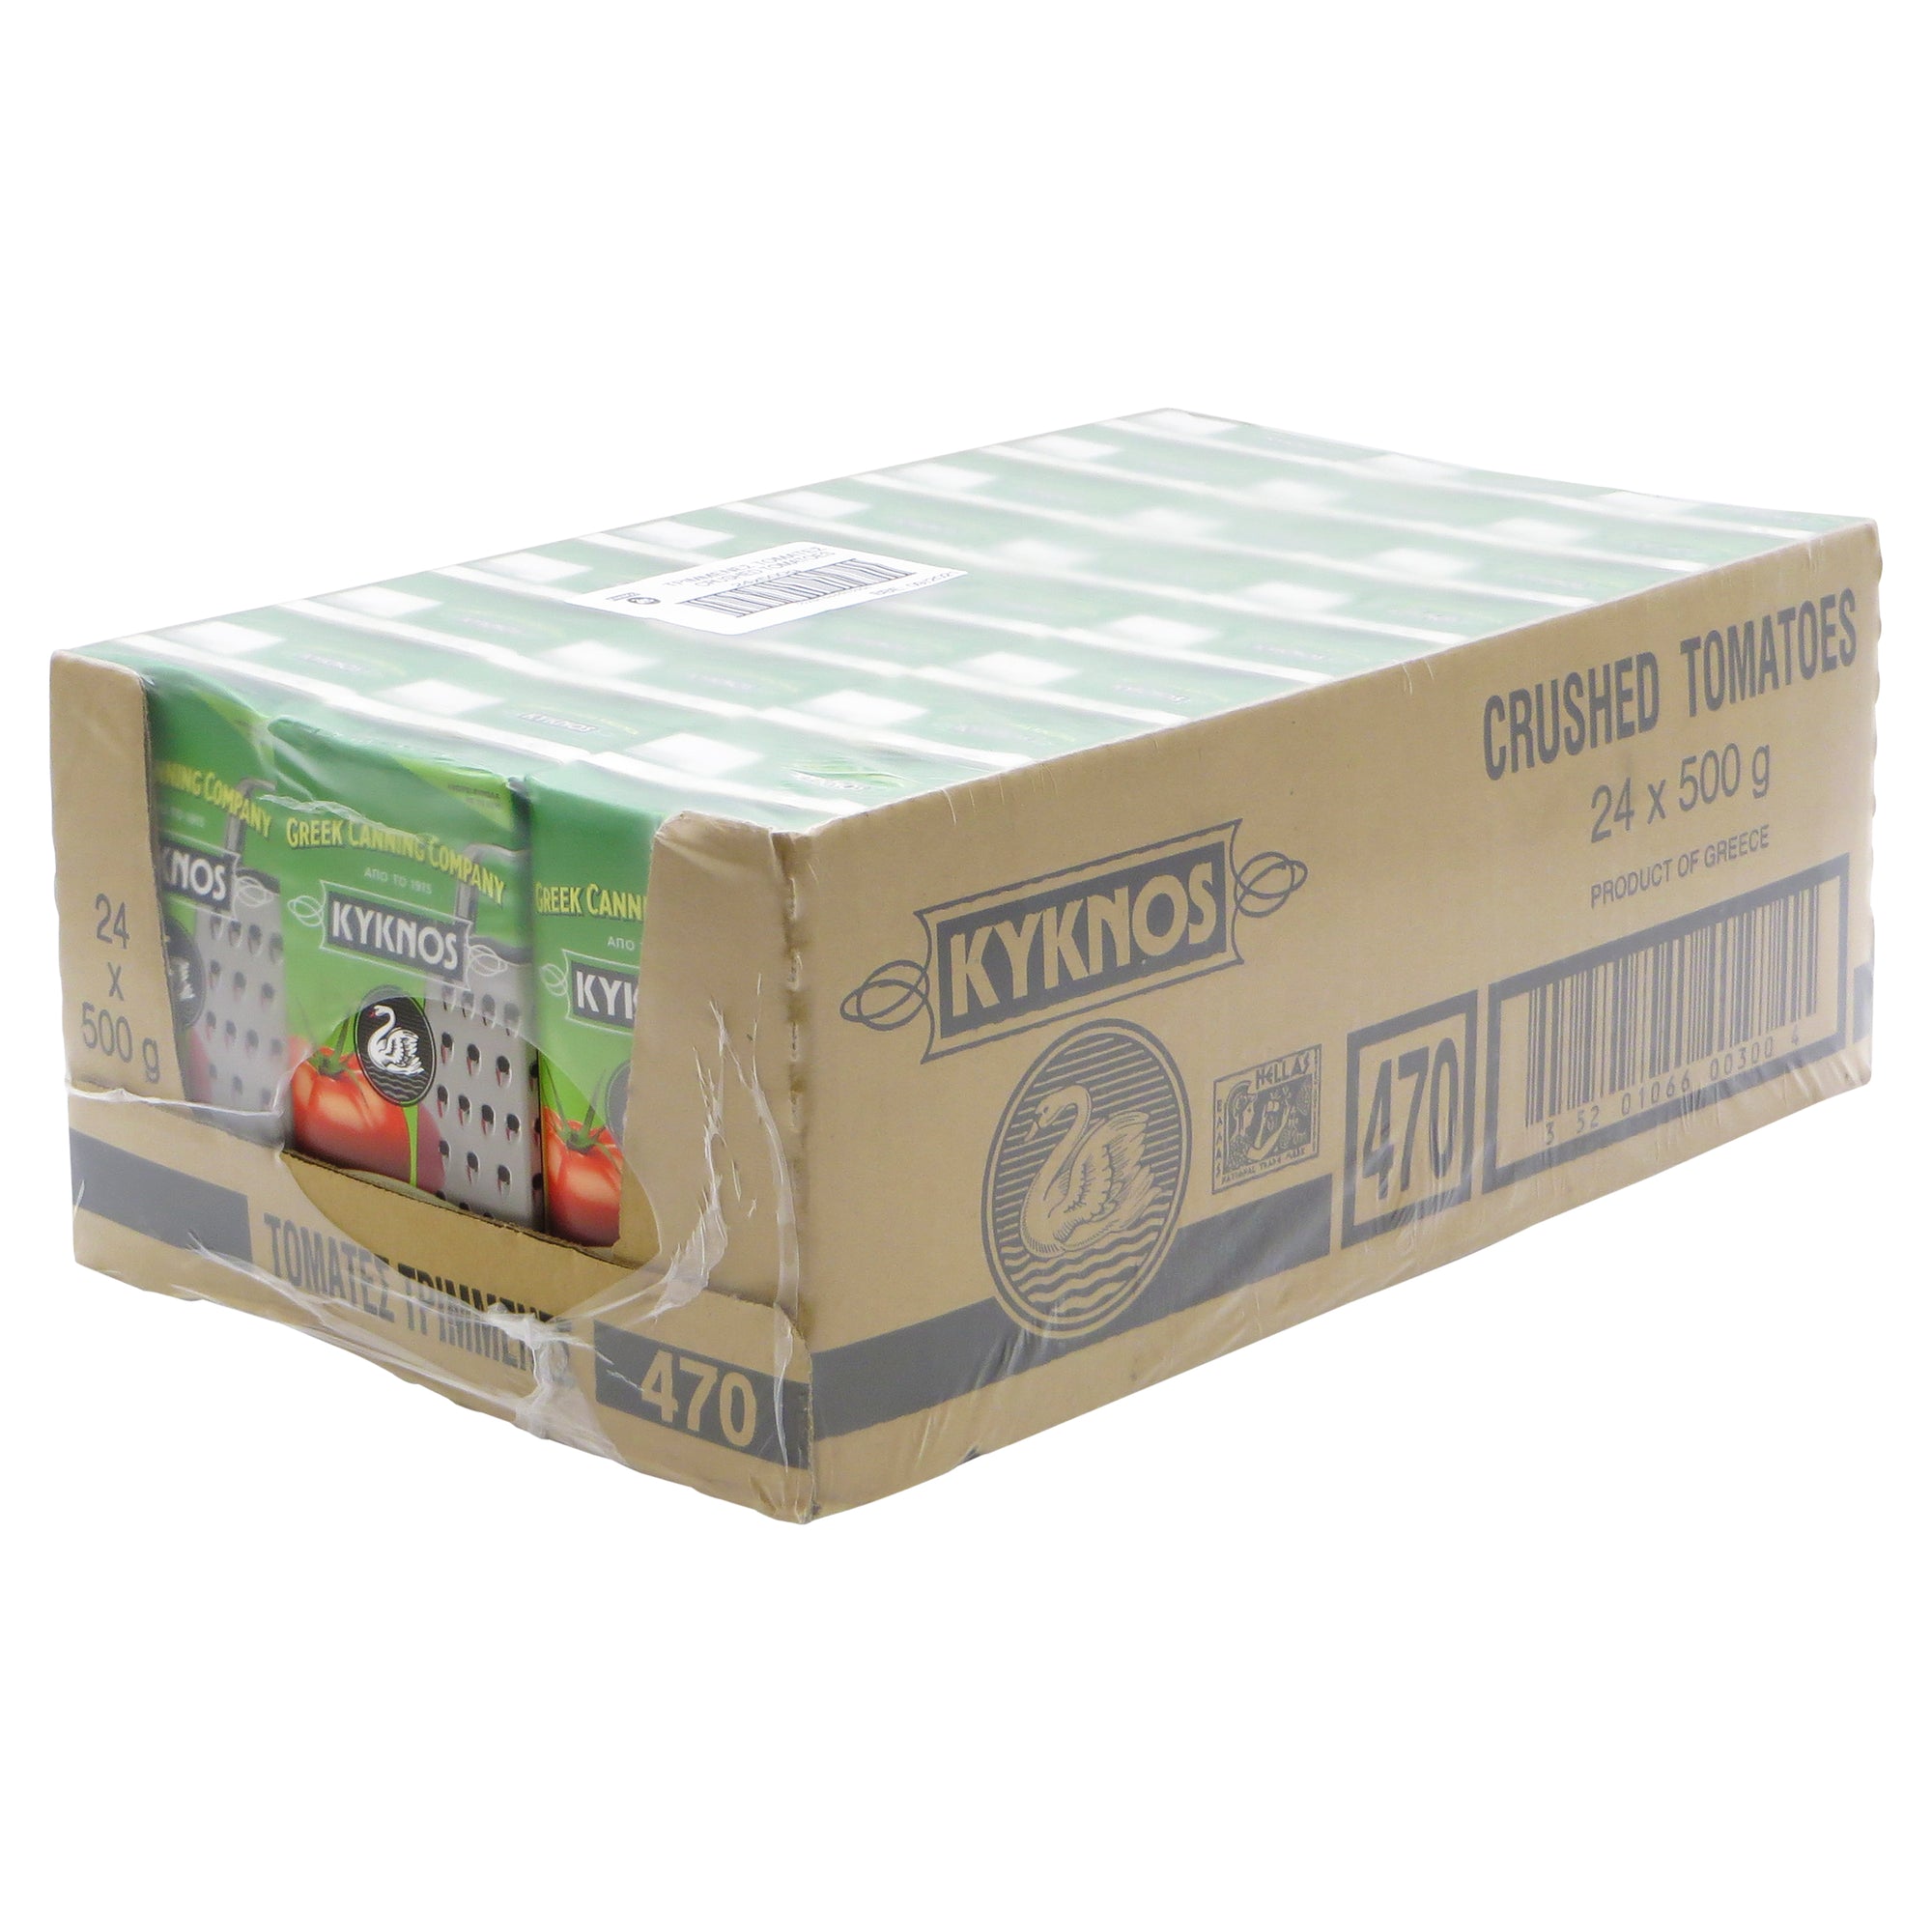 24 pack - Crushed tomatoes in carton 500g